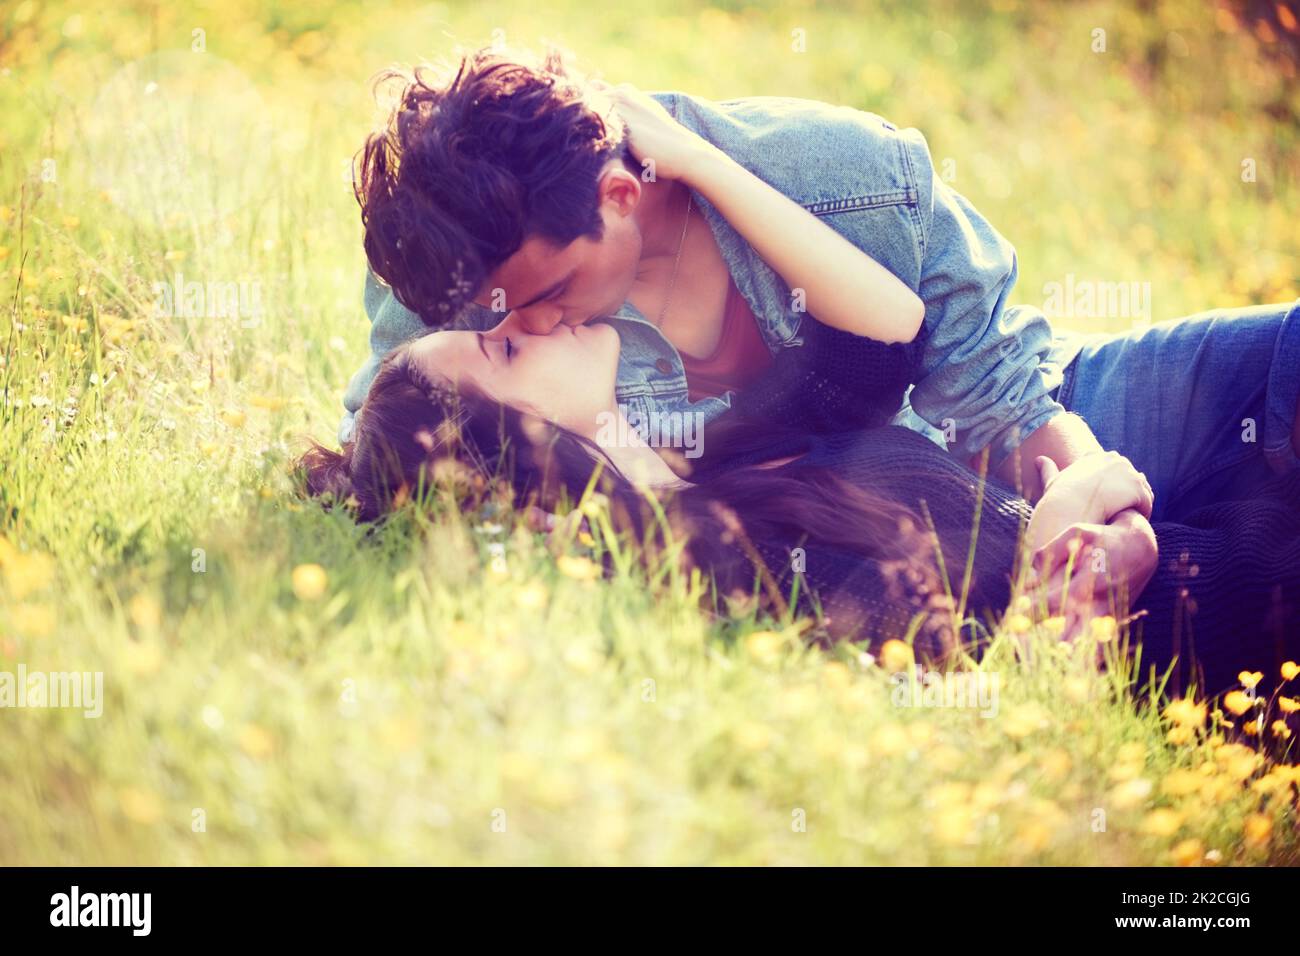 Youthful romance. Vintage style image of a young couple kissing romantically in a summer field. Stock Photo